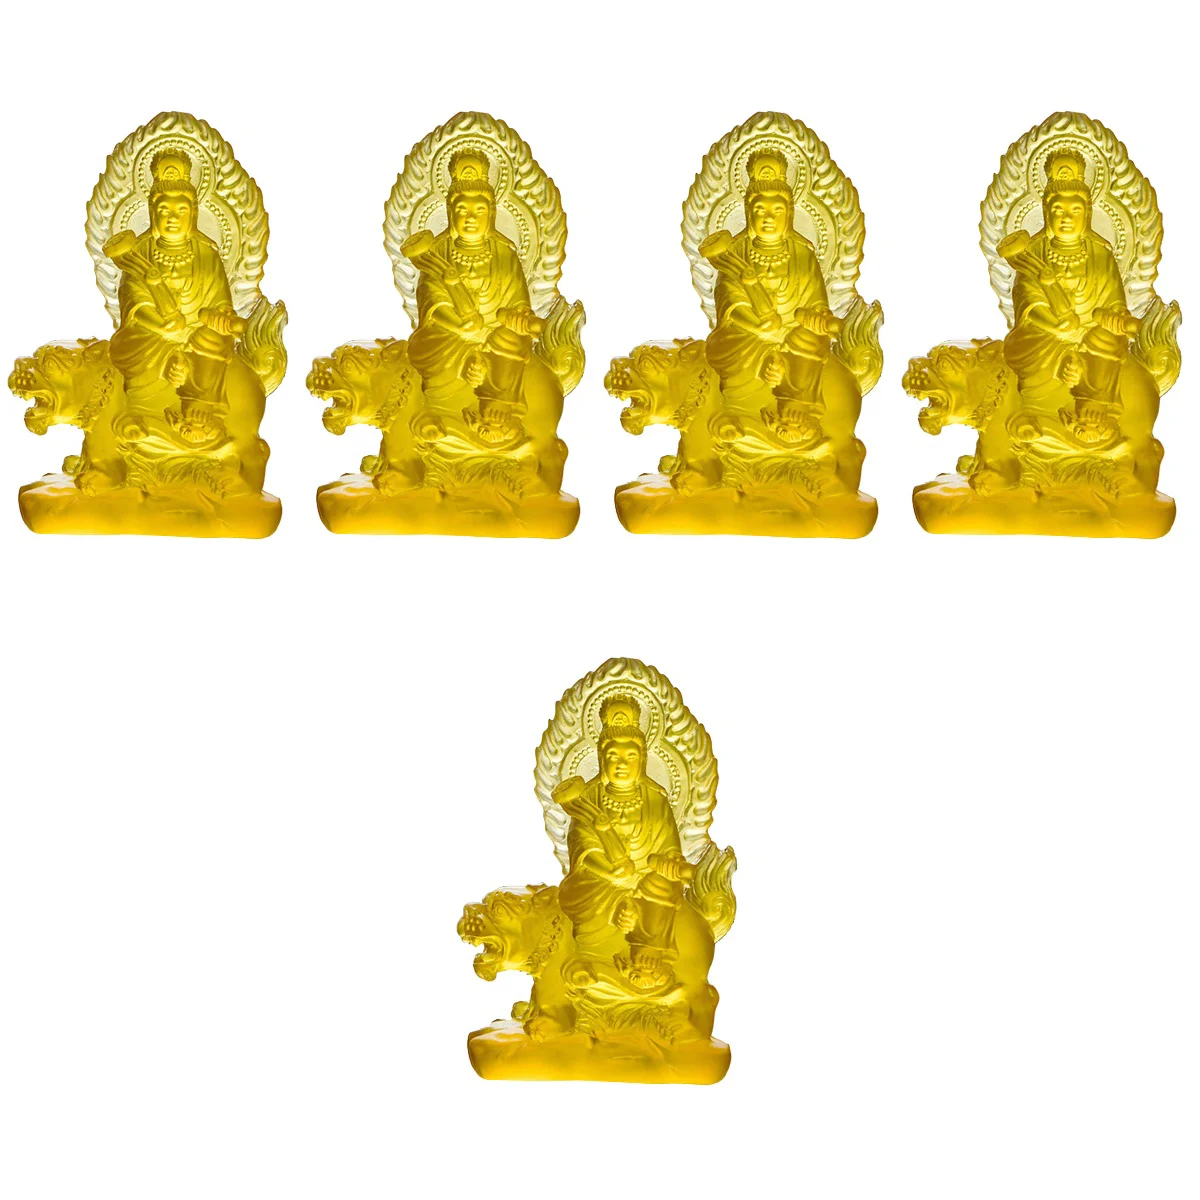 5x Figurine Home Home Office Temple Resin Craft Exquisite Craft Statue for Desk Bedroom Home